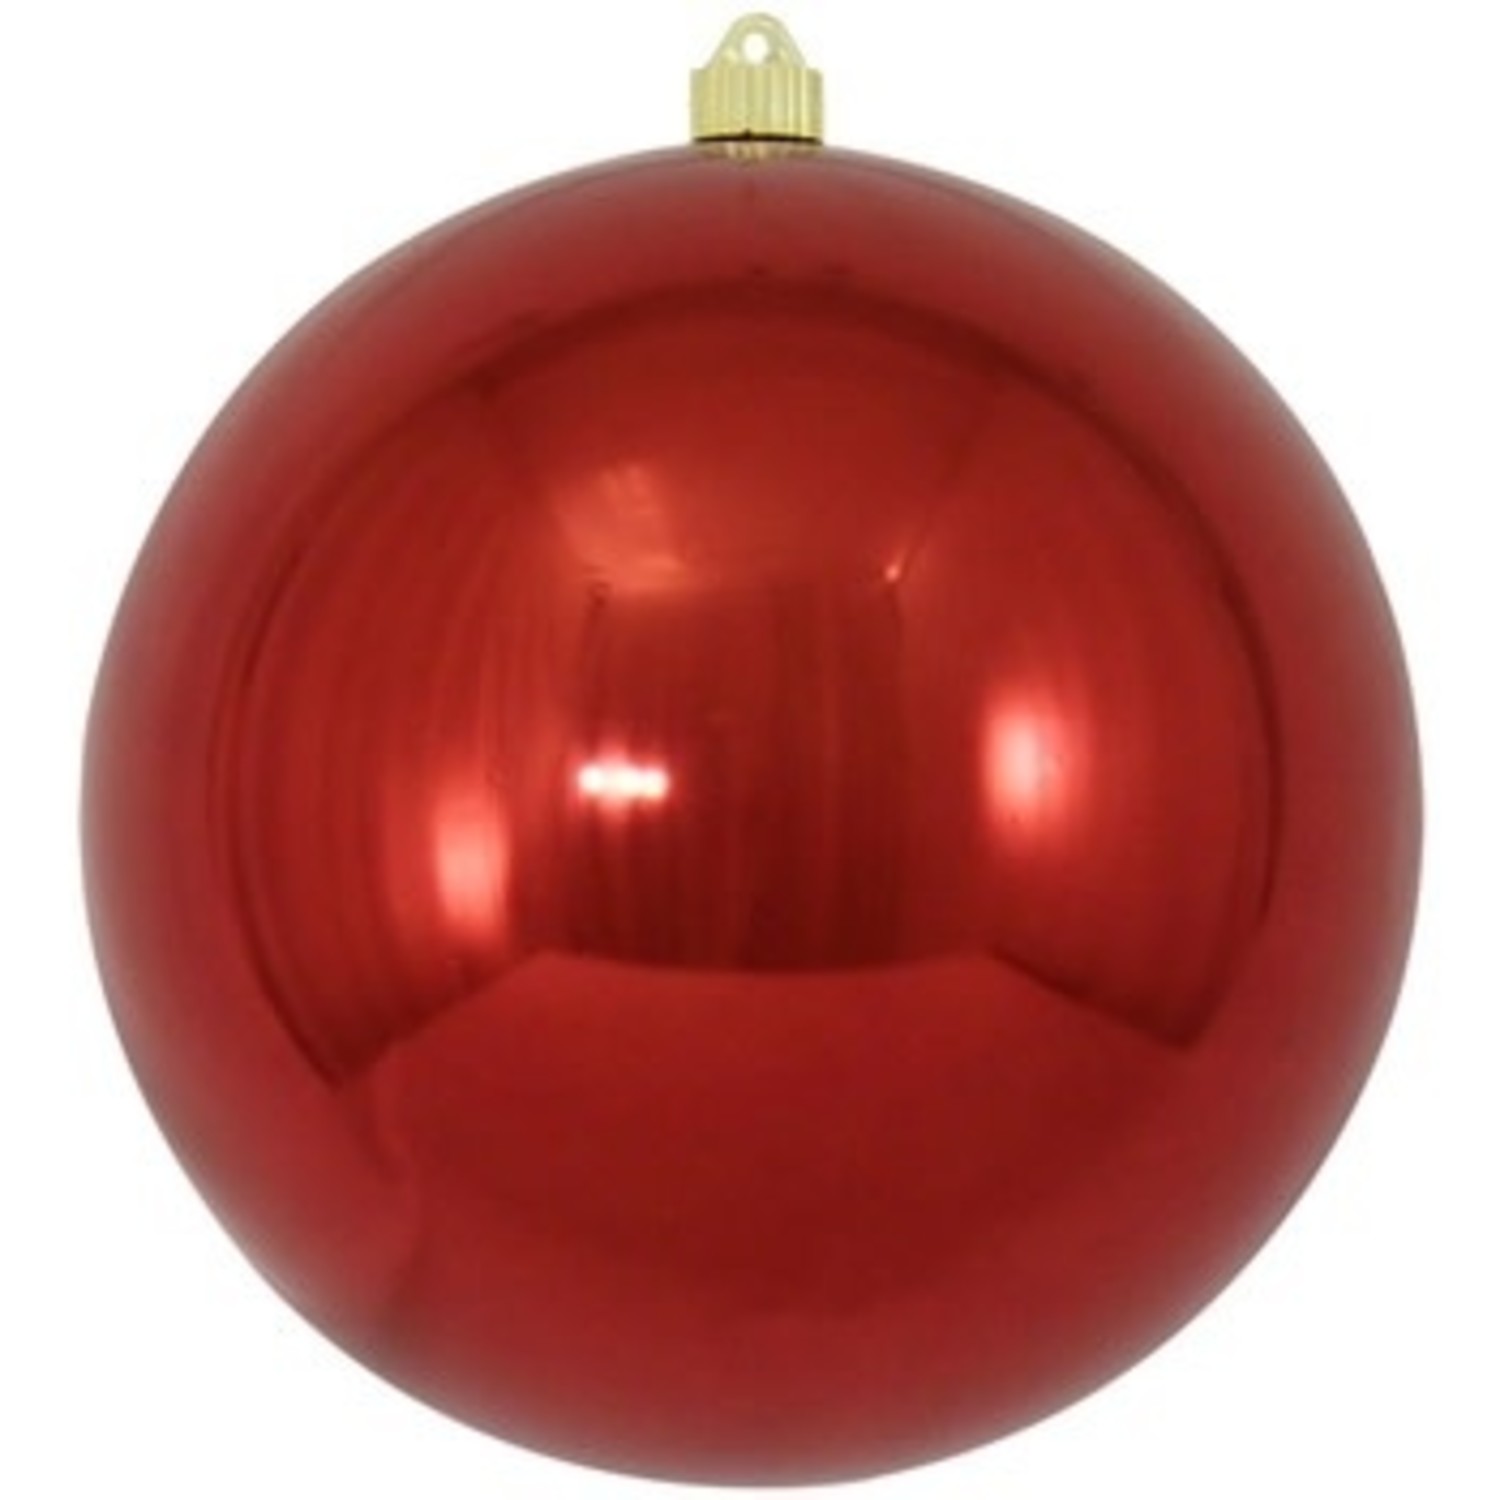 10 Giant Commercial Ball Ornament Case - Amber Marie and Company